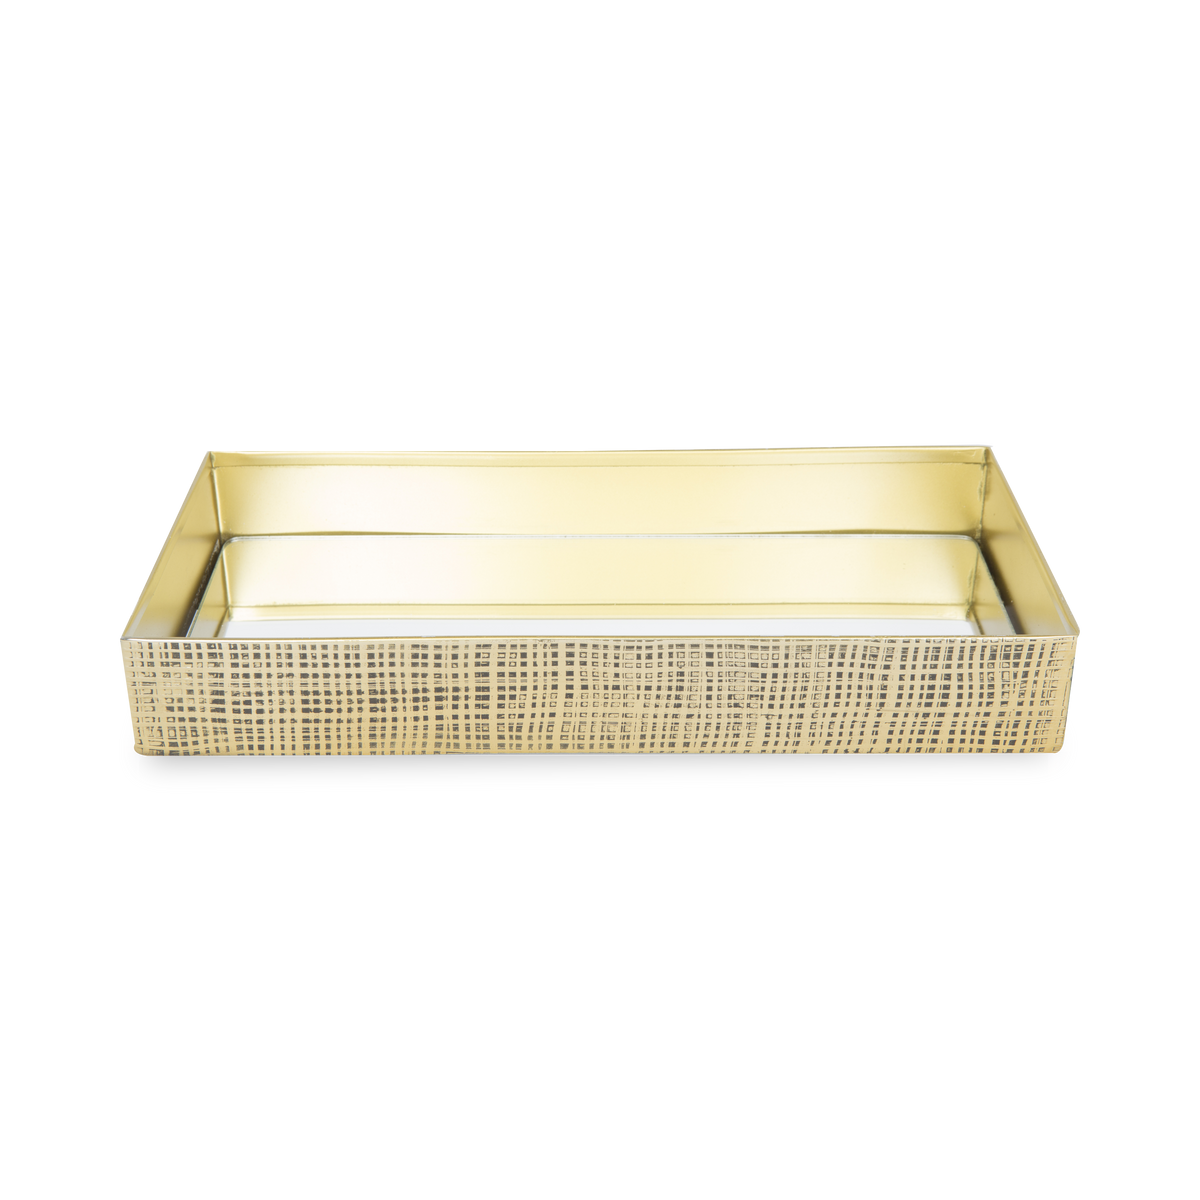 The richly finished Crosshatch Tray showcases a distinct crosshatch texture in a brass finish.